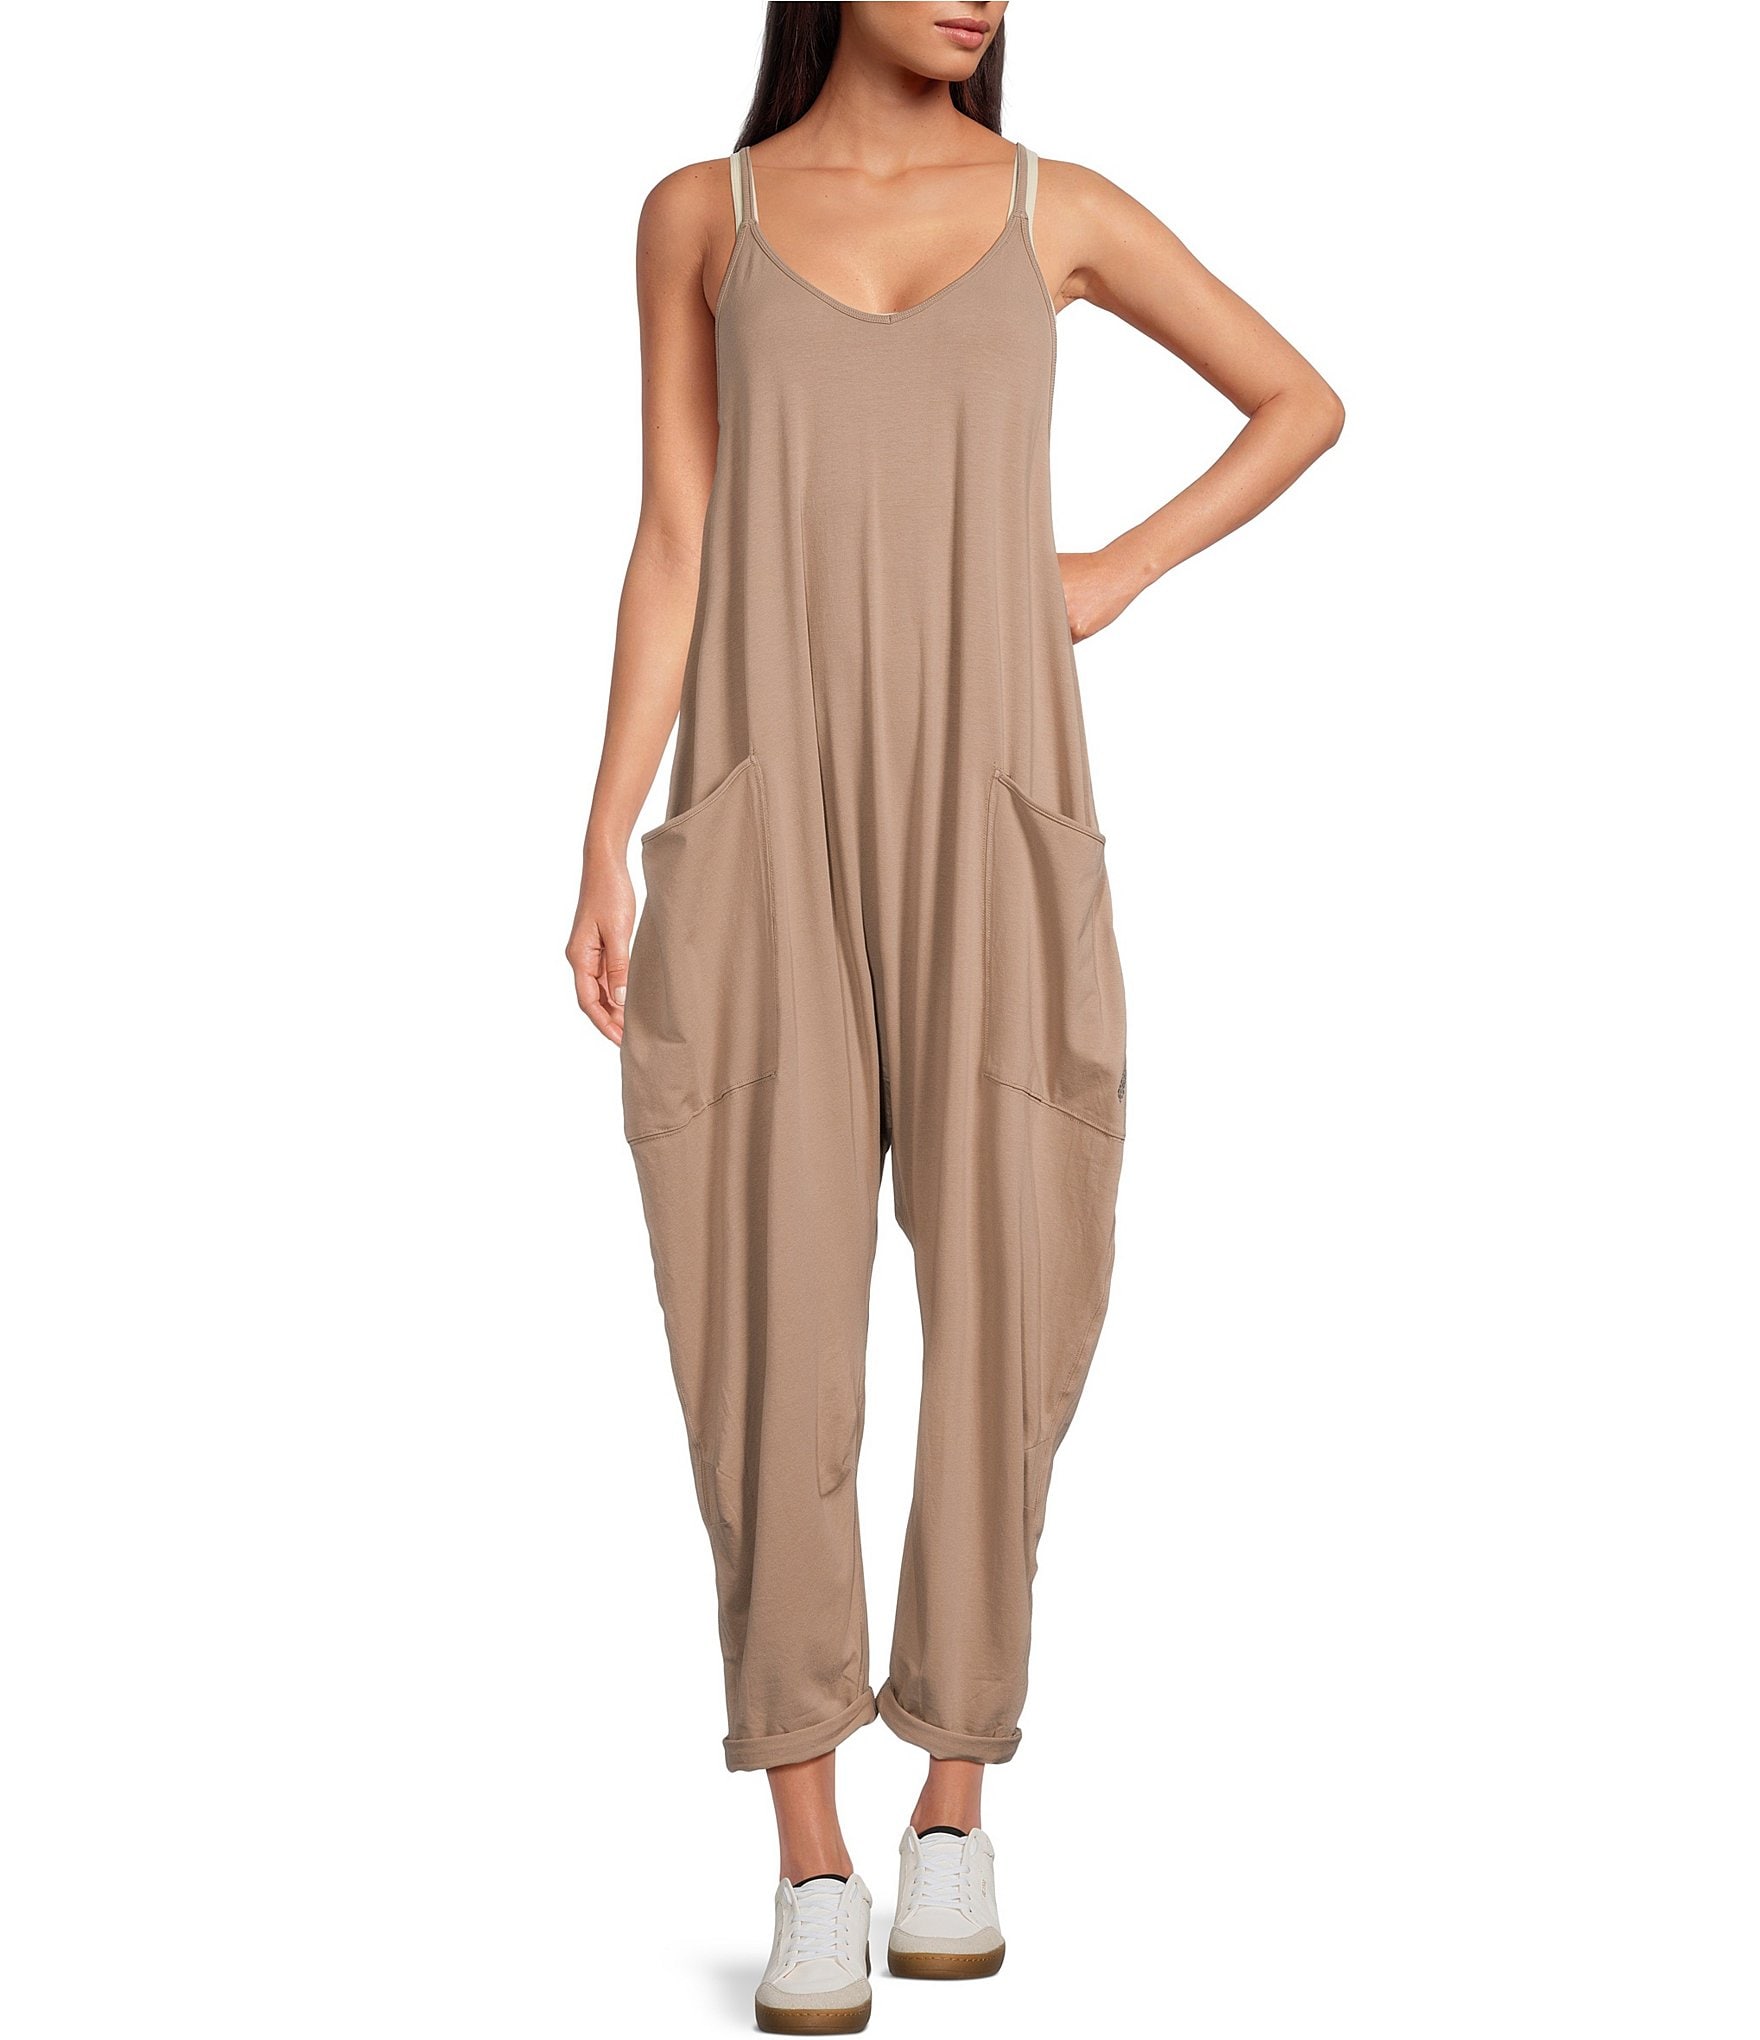 Free People Movement One More Serve Sleeveless Strappy Back Onesie |  Dillard's